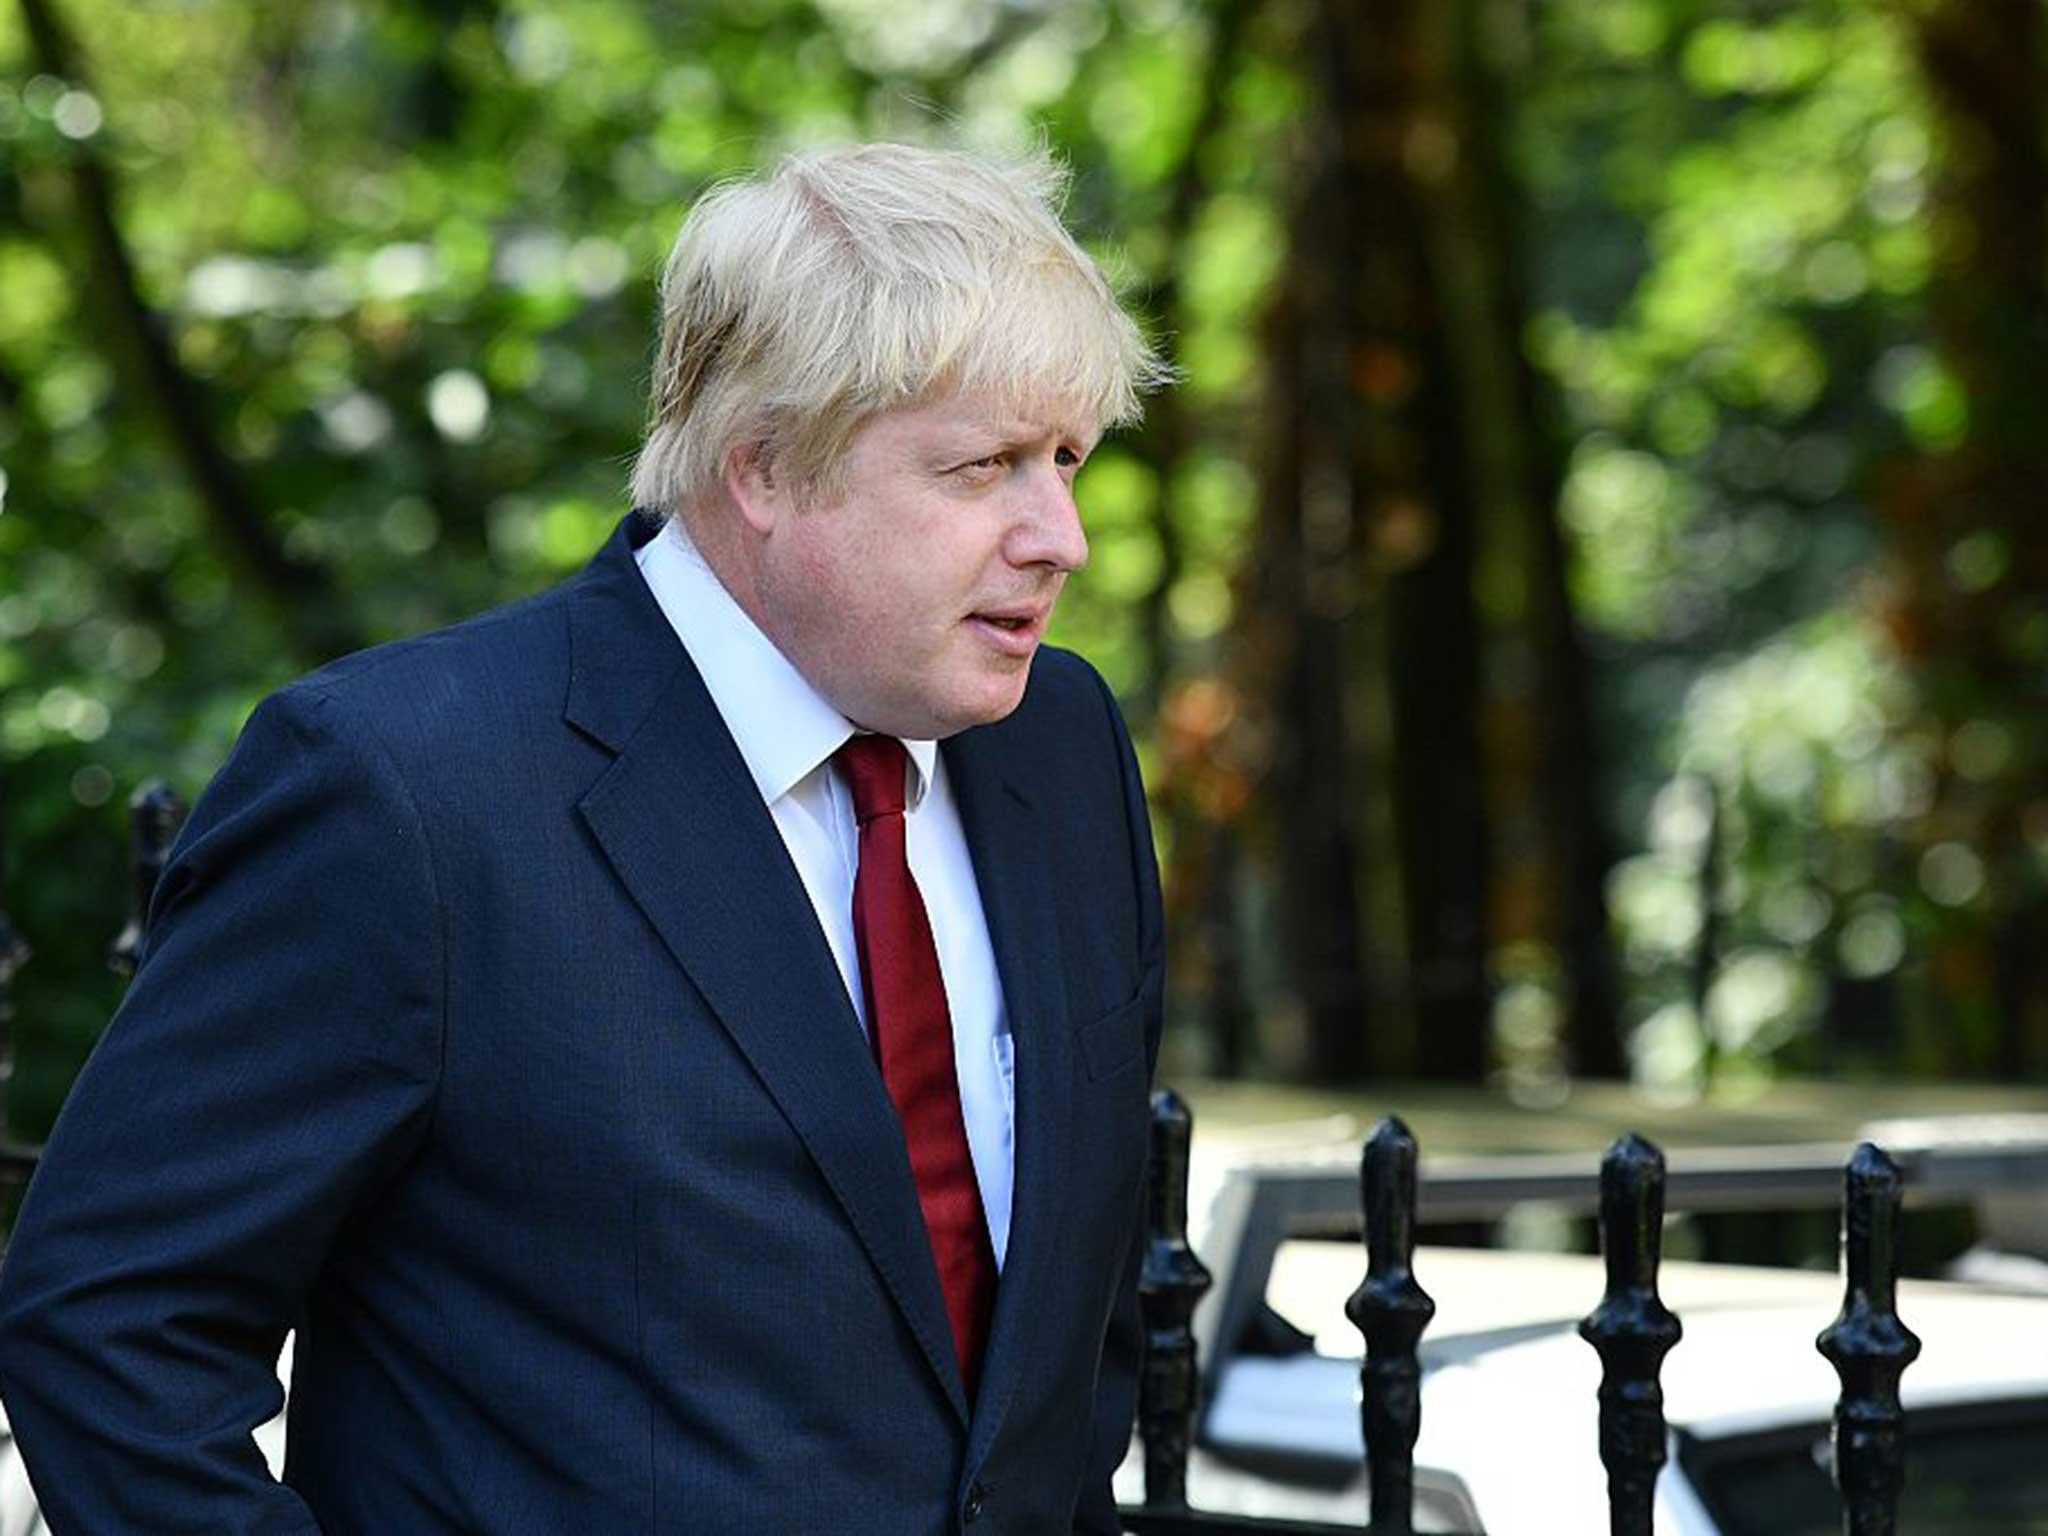 Boris Johnson insisted that the result of the referendum did not represent a retreat into isolationism and that Britain would remain a "great European power"